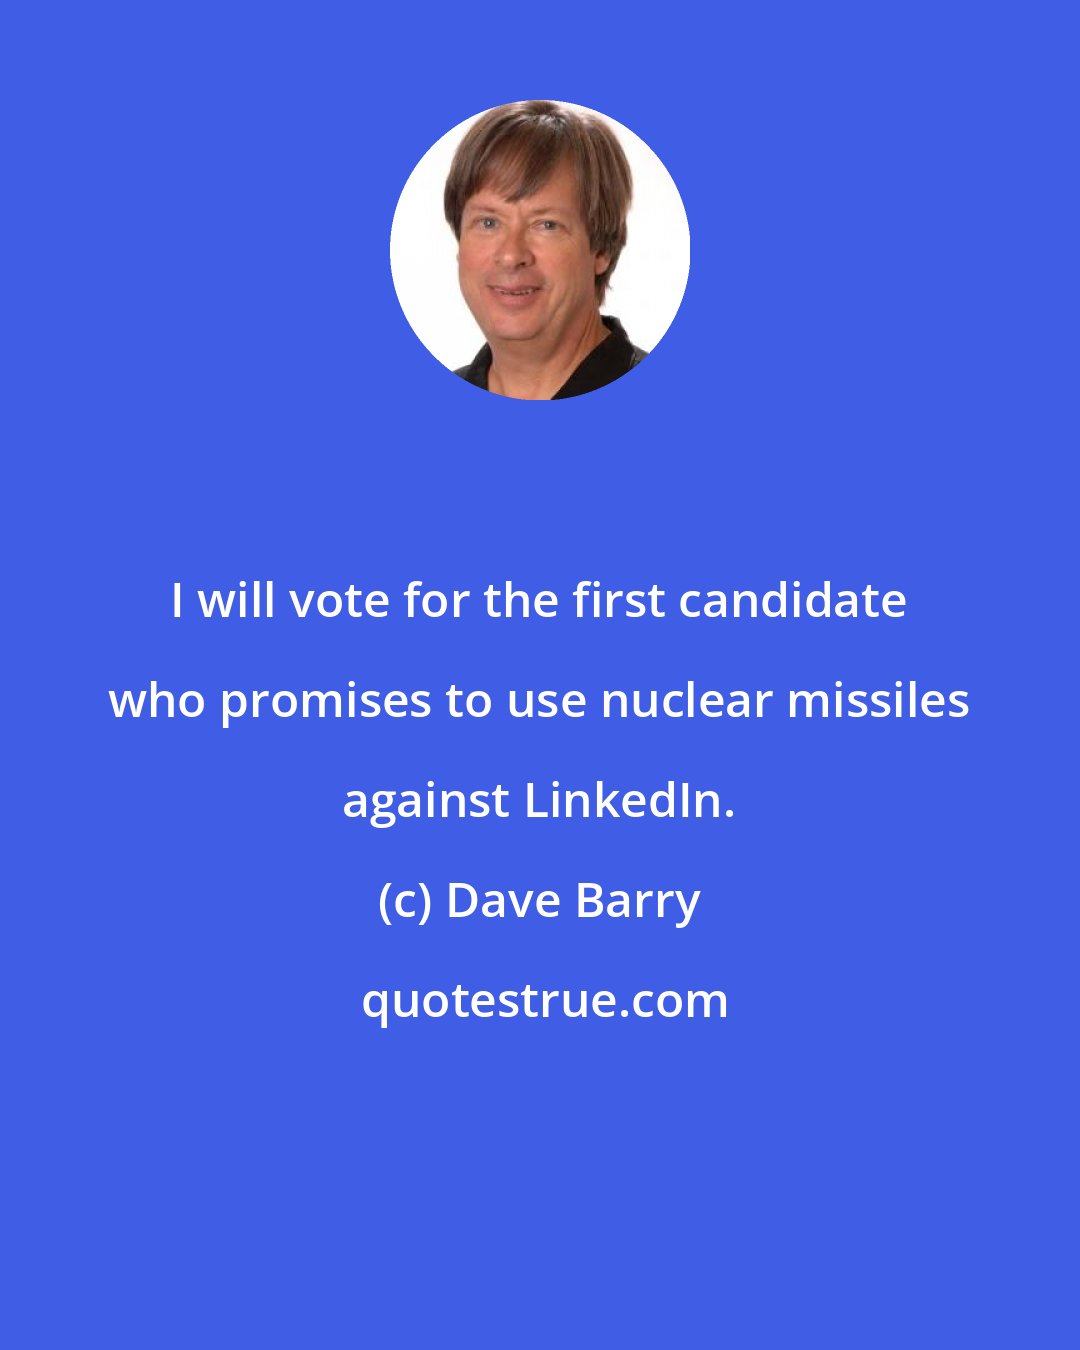 Dave Barry: I will vote for the first candidate who promises to use nuclear missiles against LinkedIn.